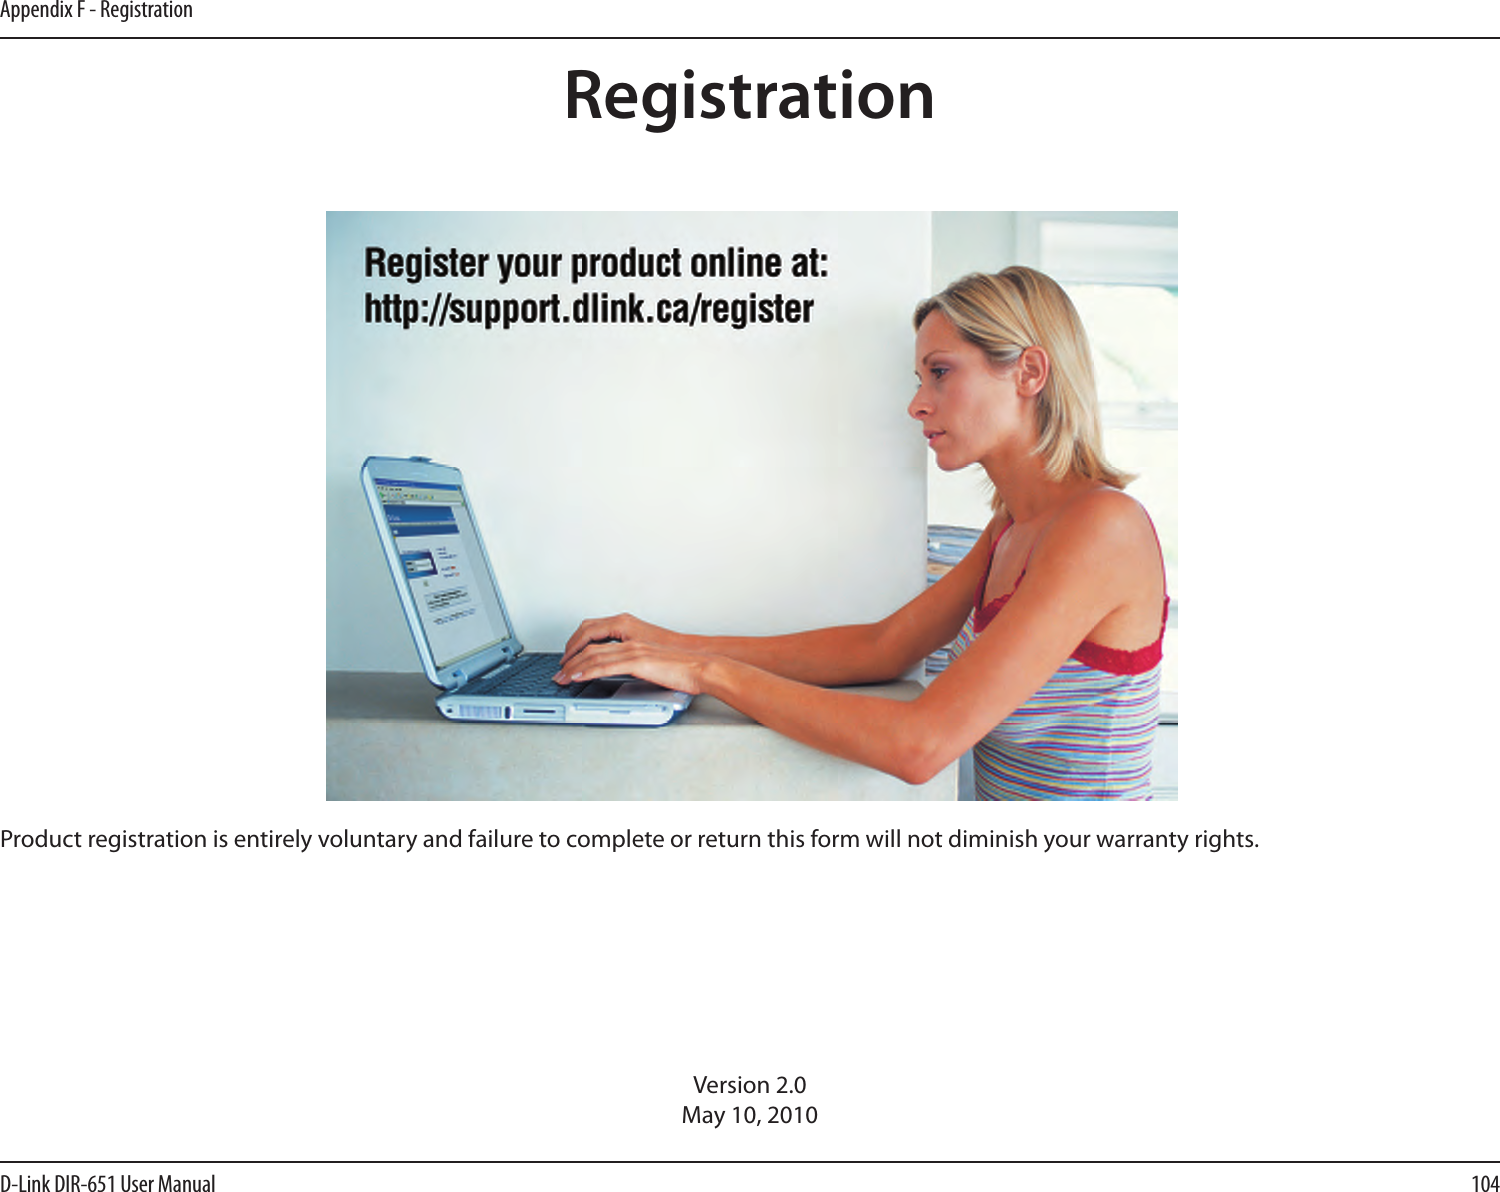 104D-Link DIR-651 User ManualAppendix F - RegistrationVersion 2.0May 10, 2010Product registration is entirely voluntary and failure to complete or return this form will not diminish your warranty rights.Registration